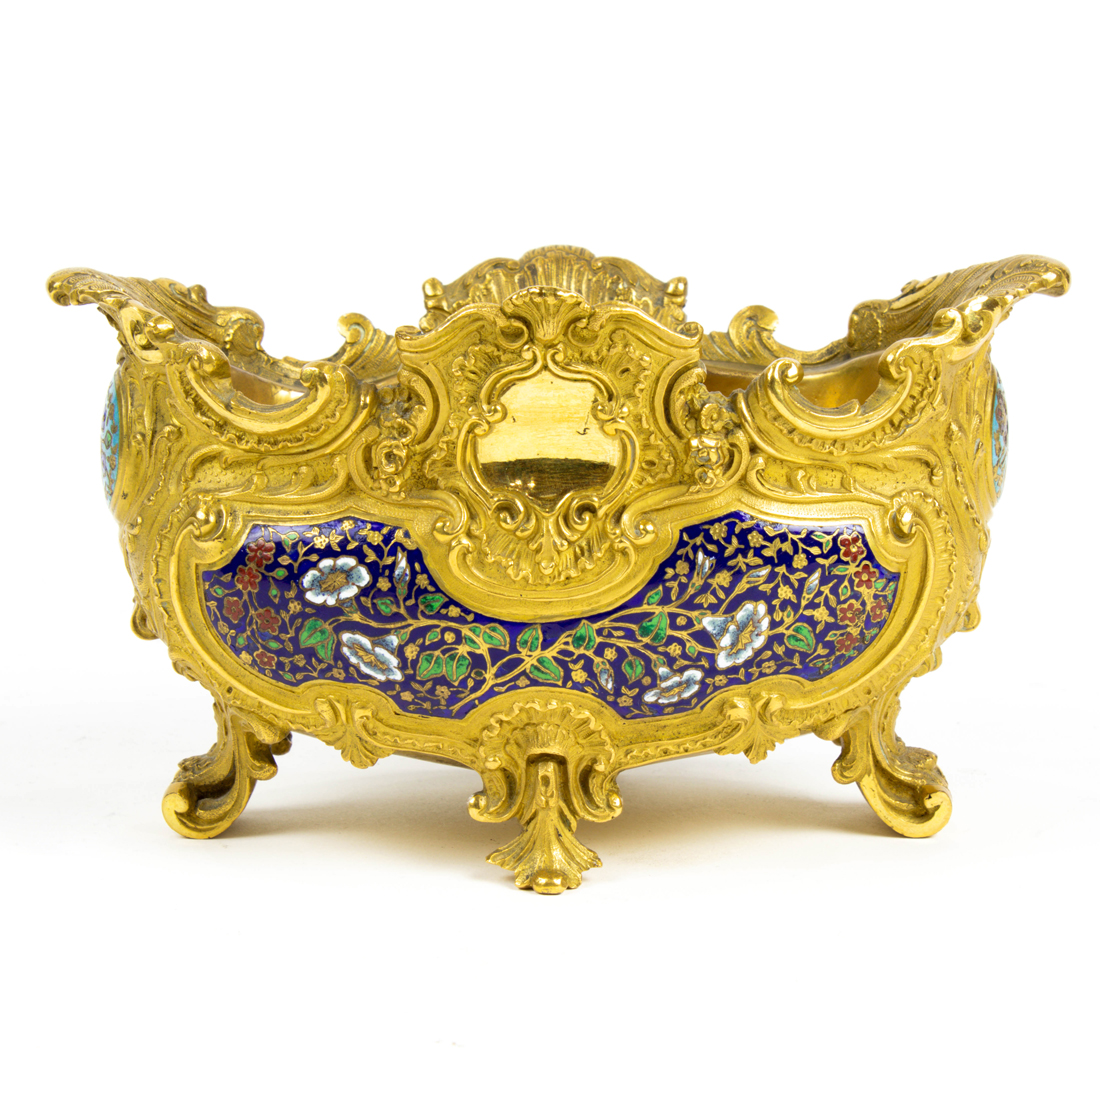 FRENCH CHAMPLEVE ENAMEL AND BRONZE FOOTED